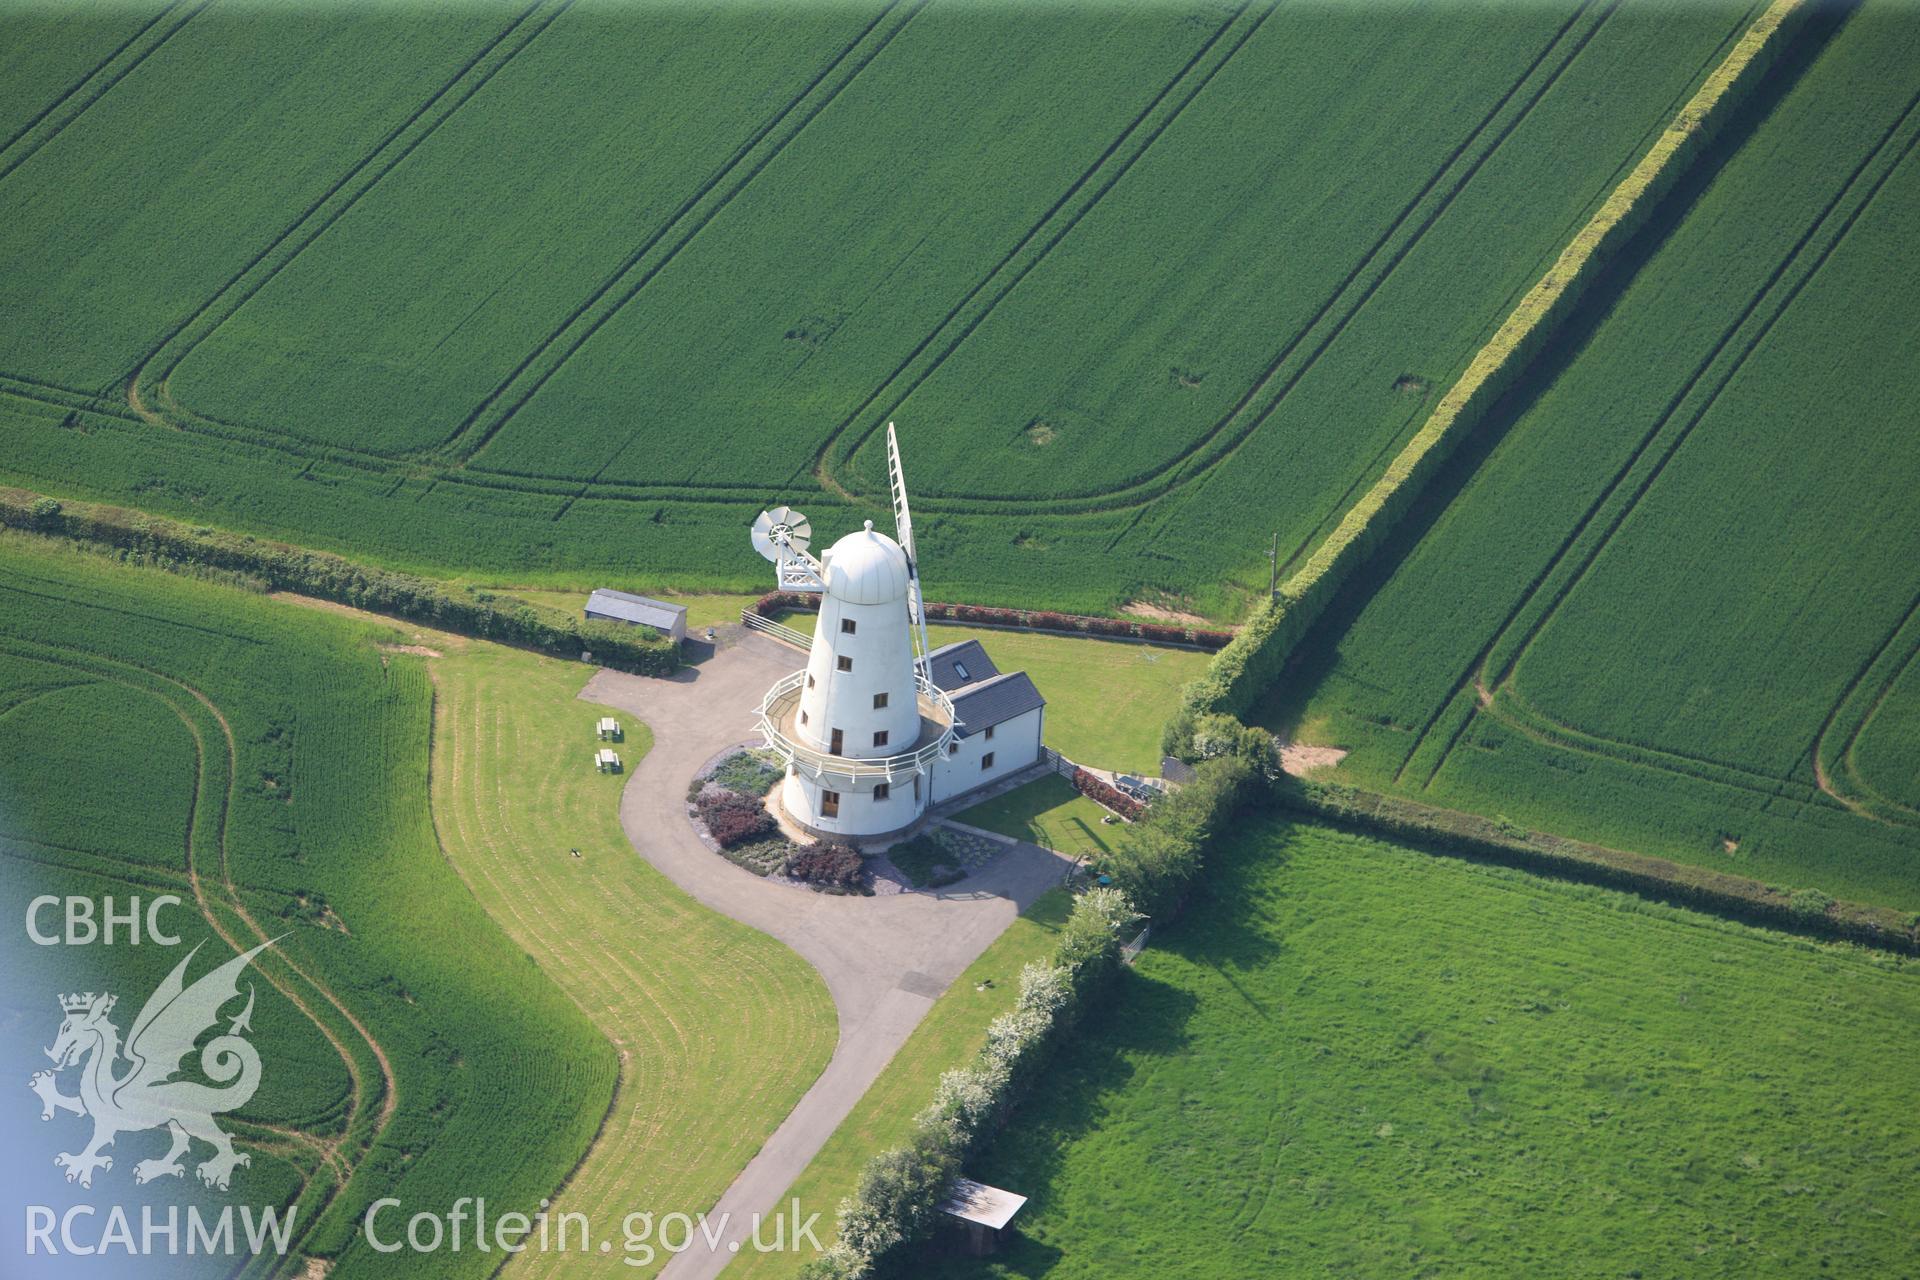 RCAHMW colour oblique photograph of Llancayo Windmill. Taken by Toby Driver on 22/05/2012.